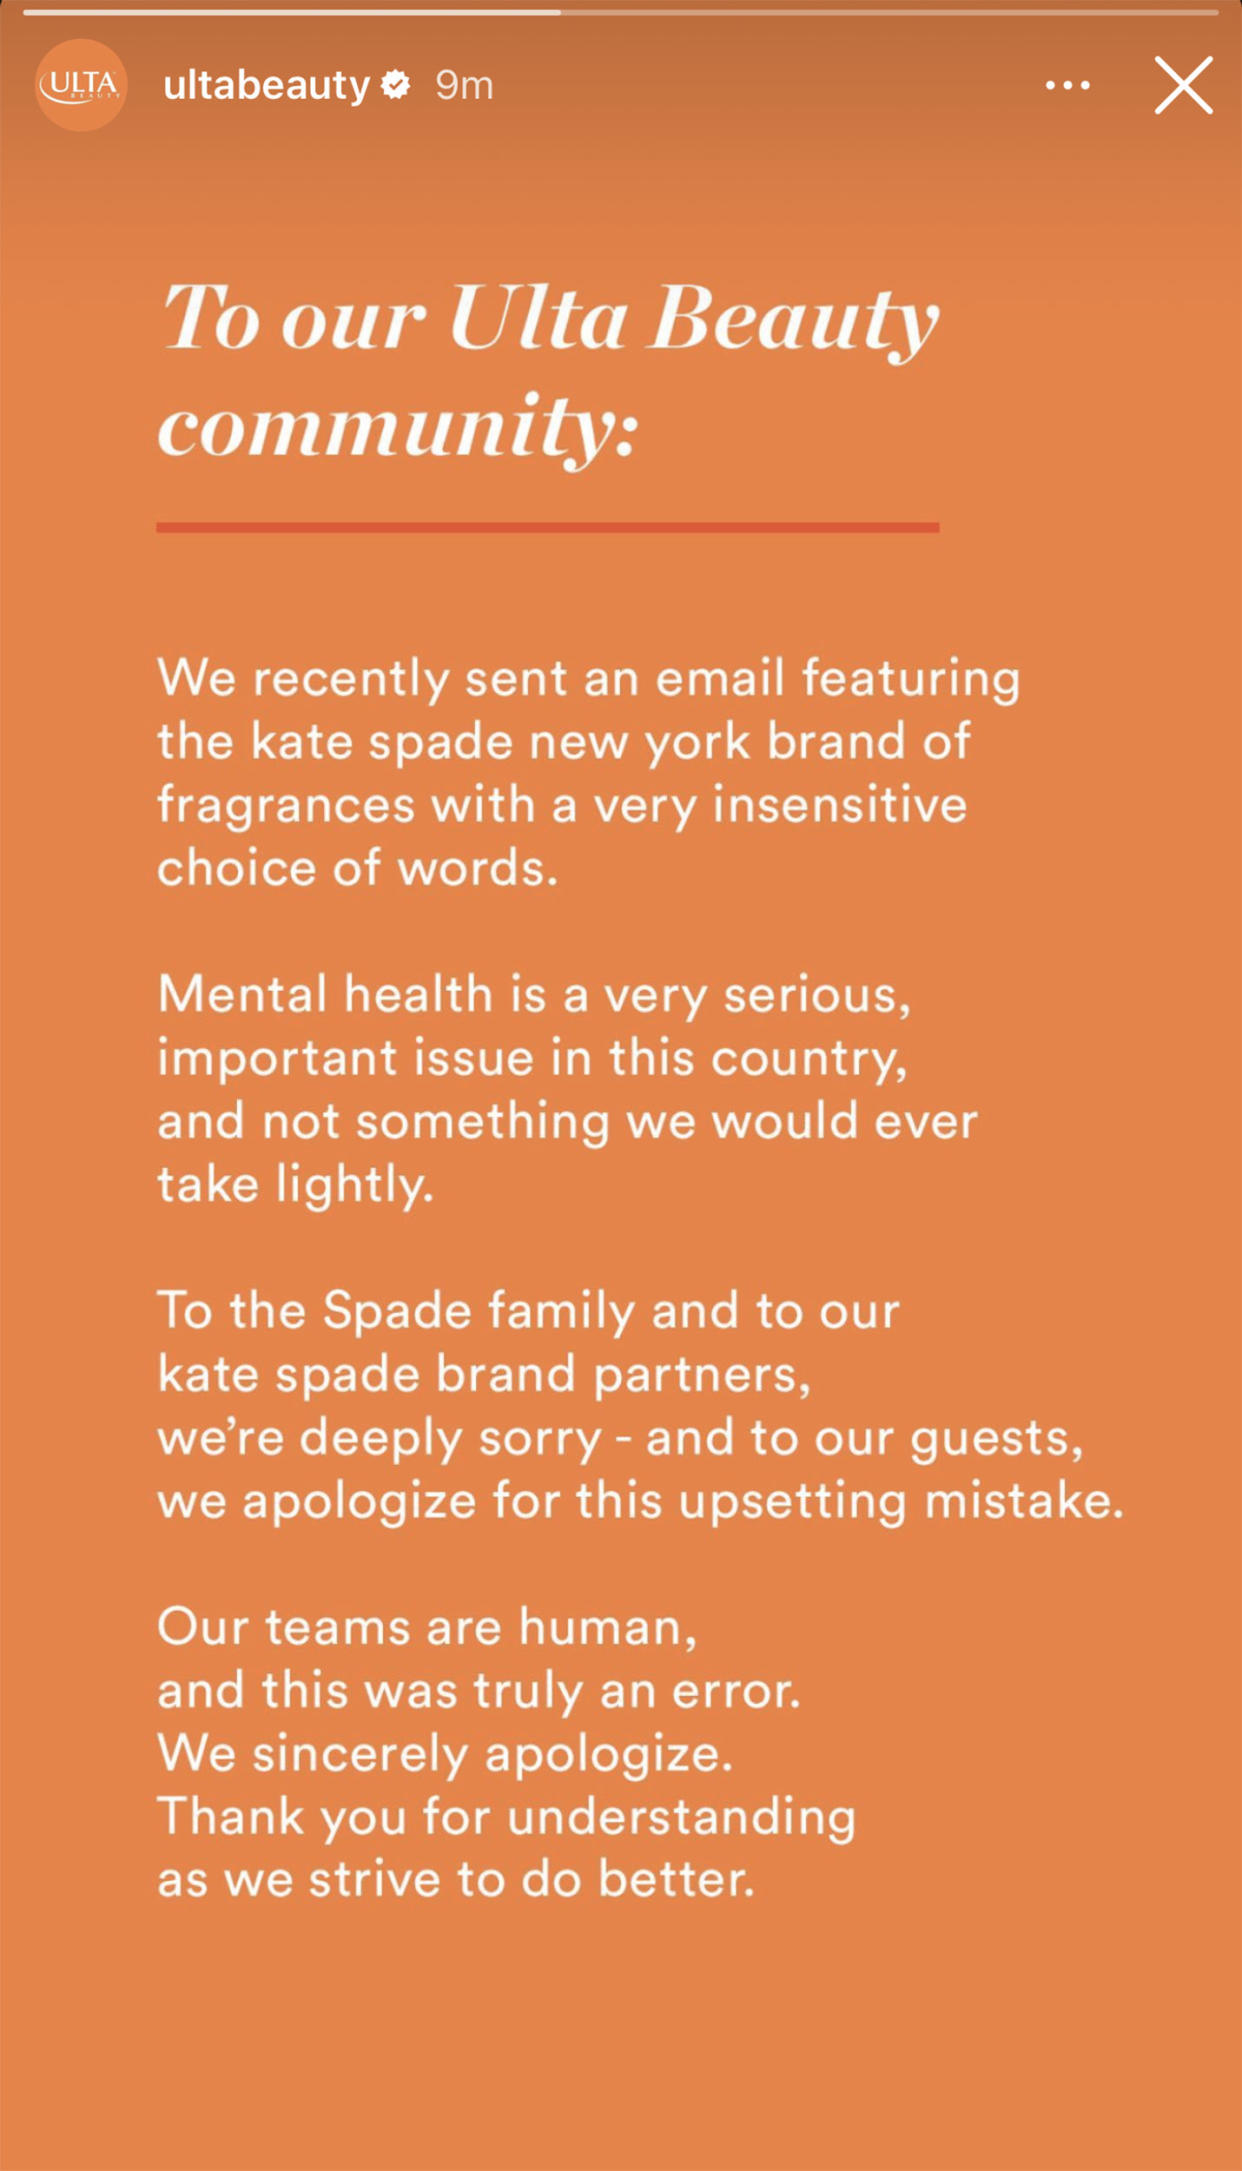 The brand shared an edited version of the emailed apology to their Instagram stories on Monday. (Instagram)